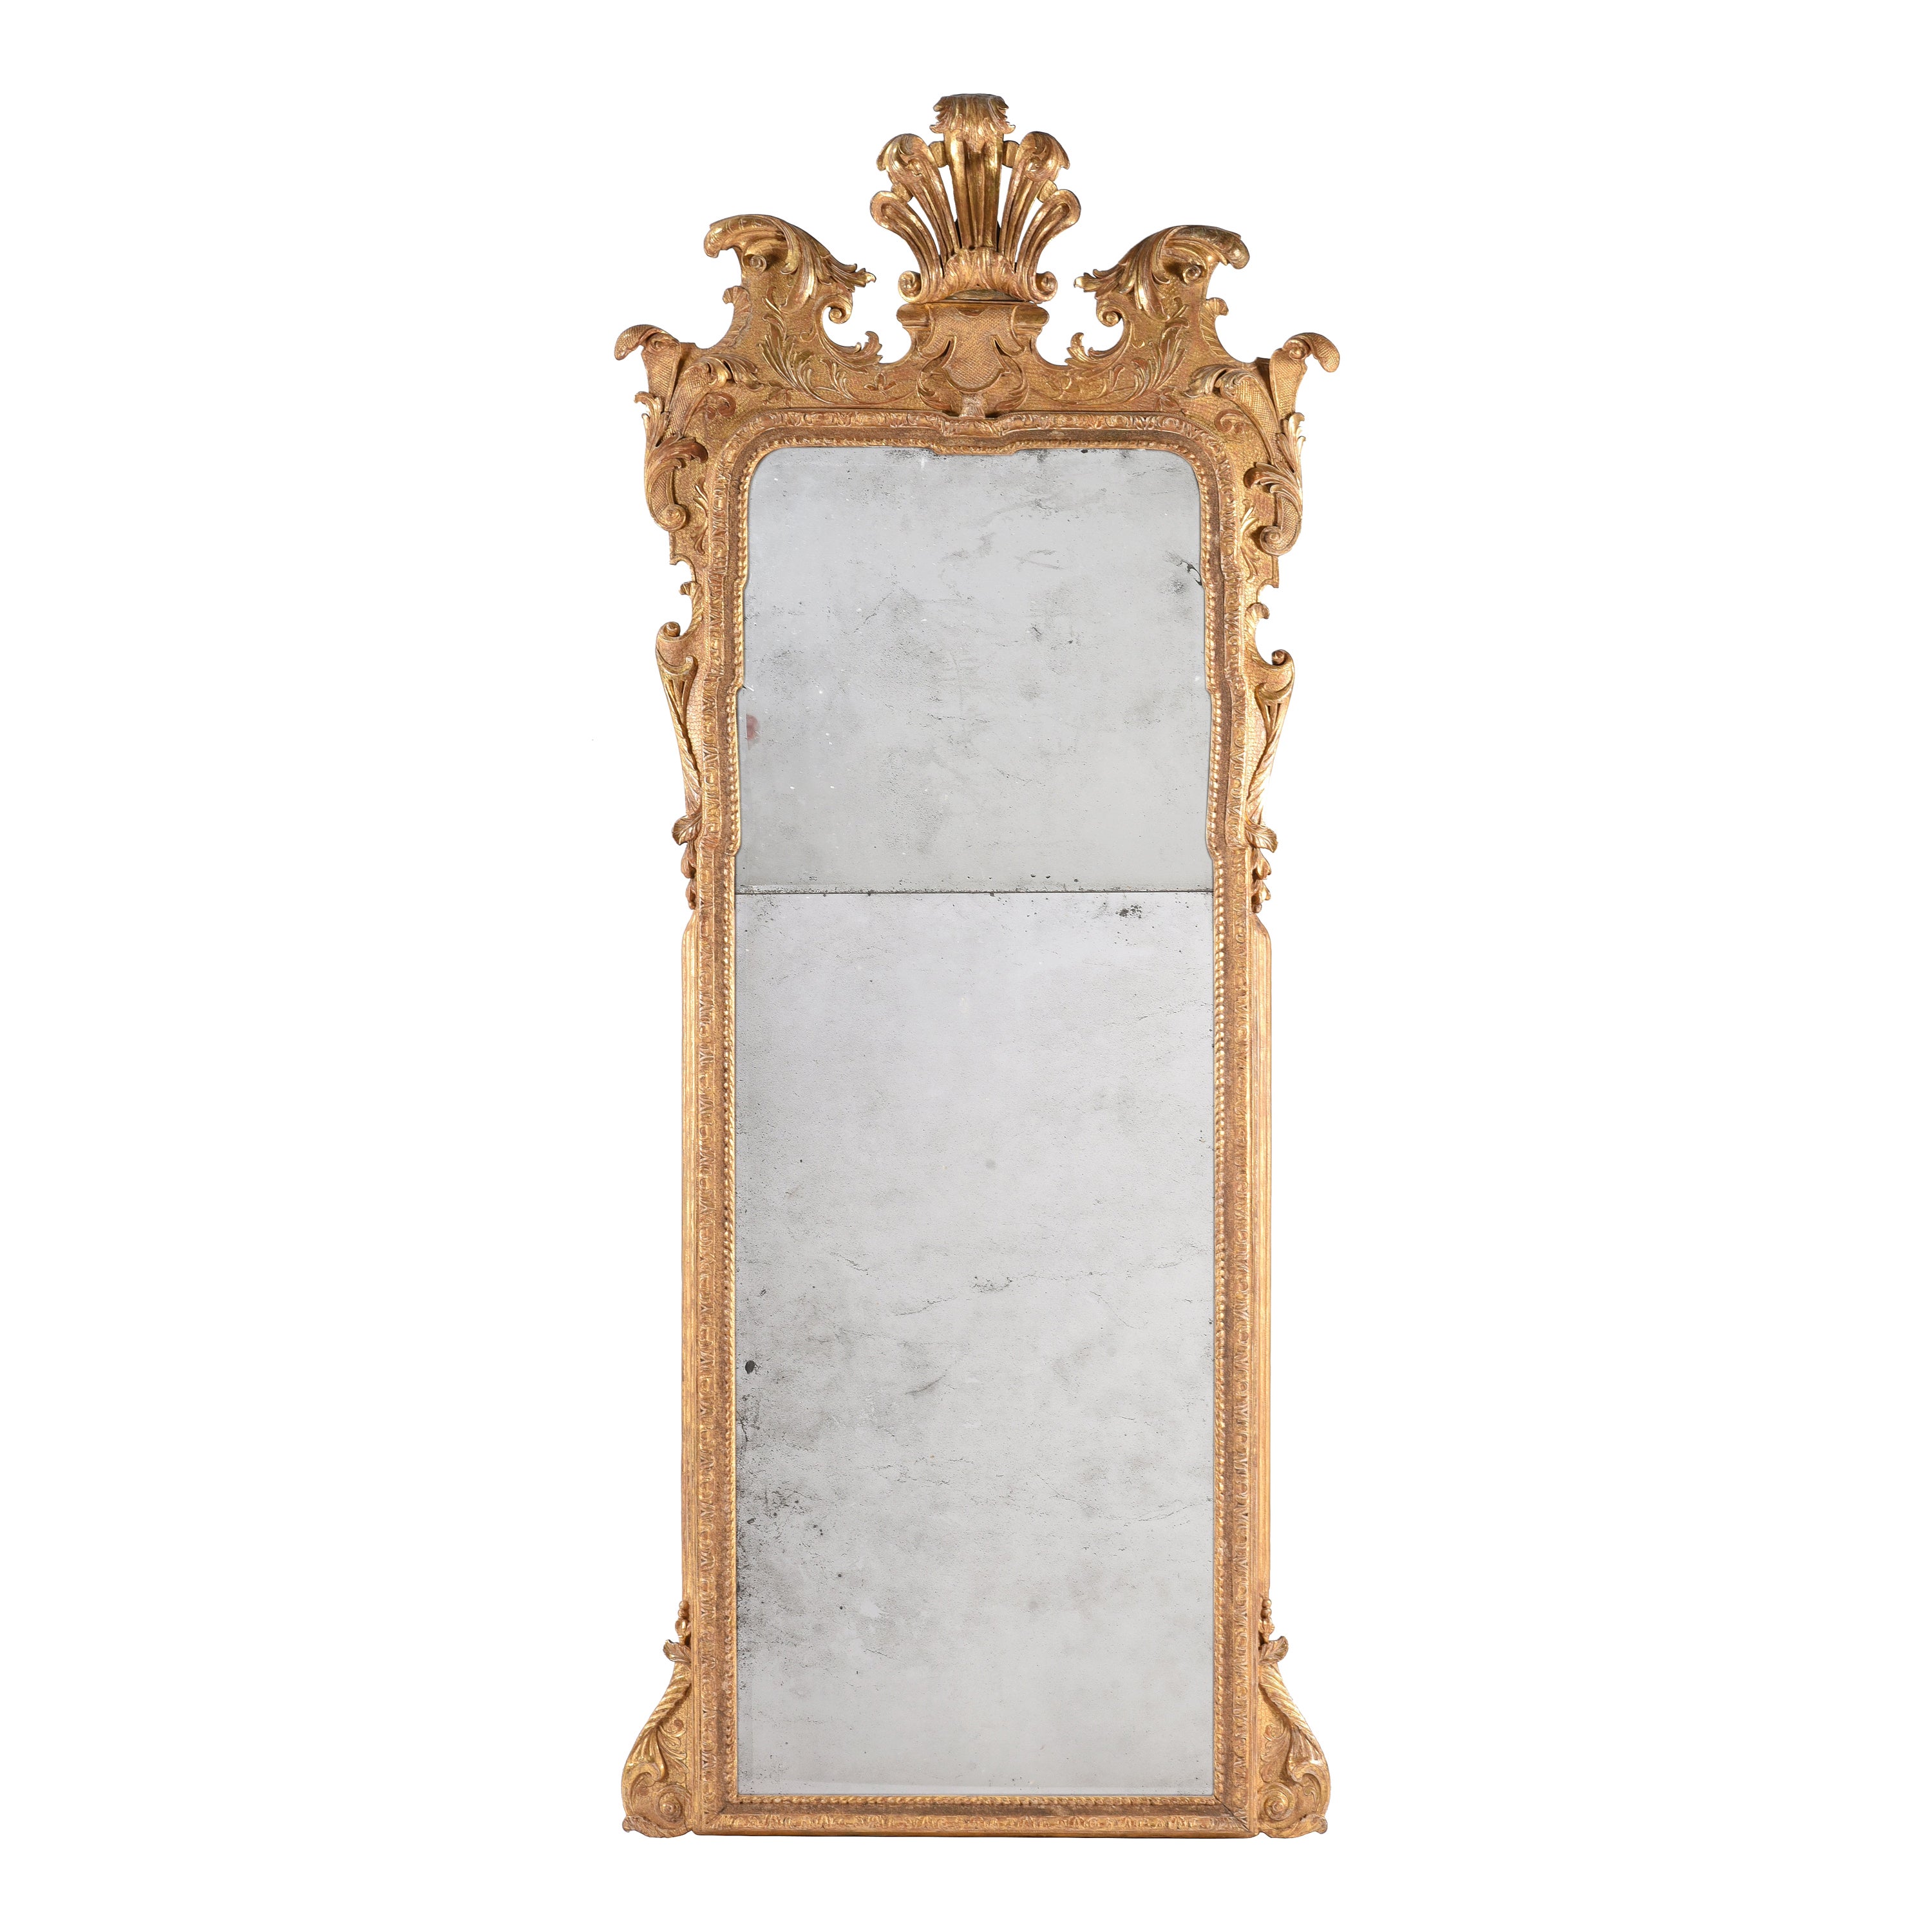 A Large 18th Century George I Gilt-Gesso Pier Glass, Attributed to John Belchier For Sale